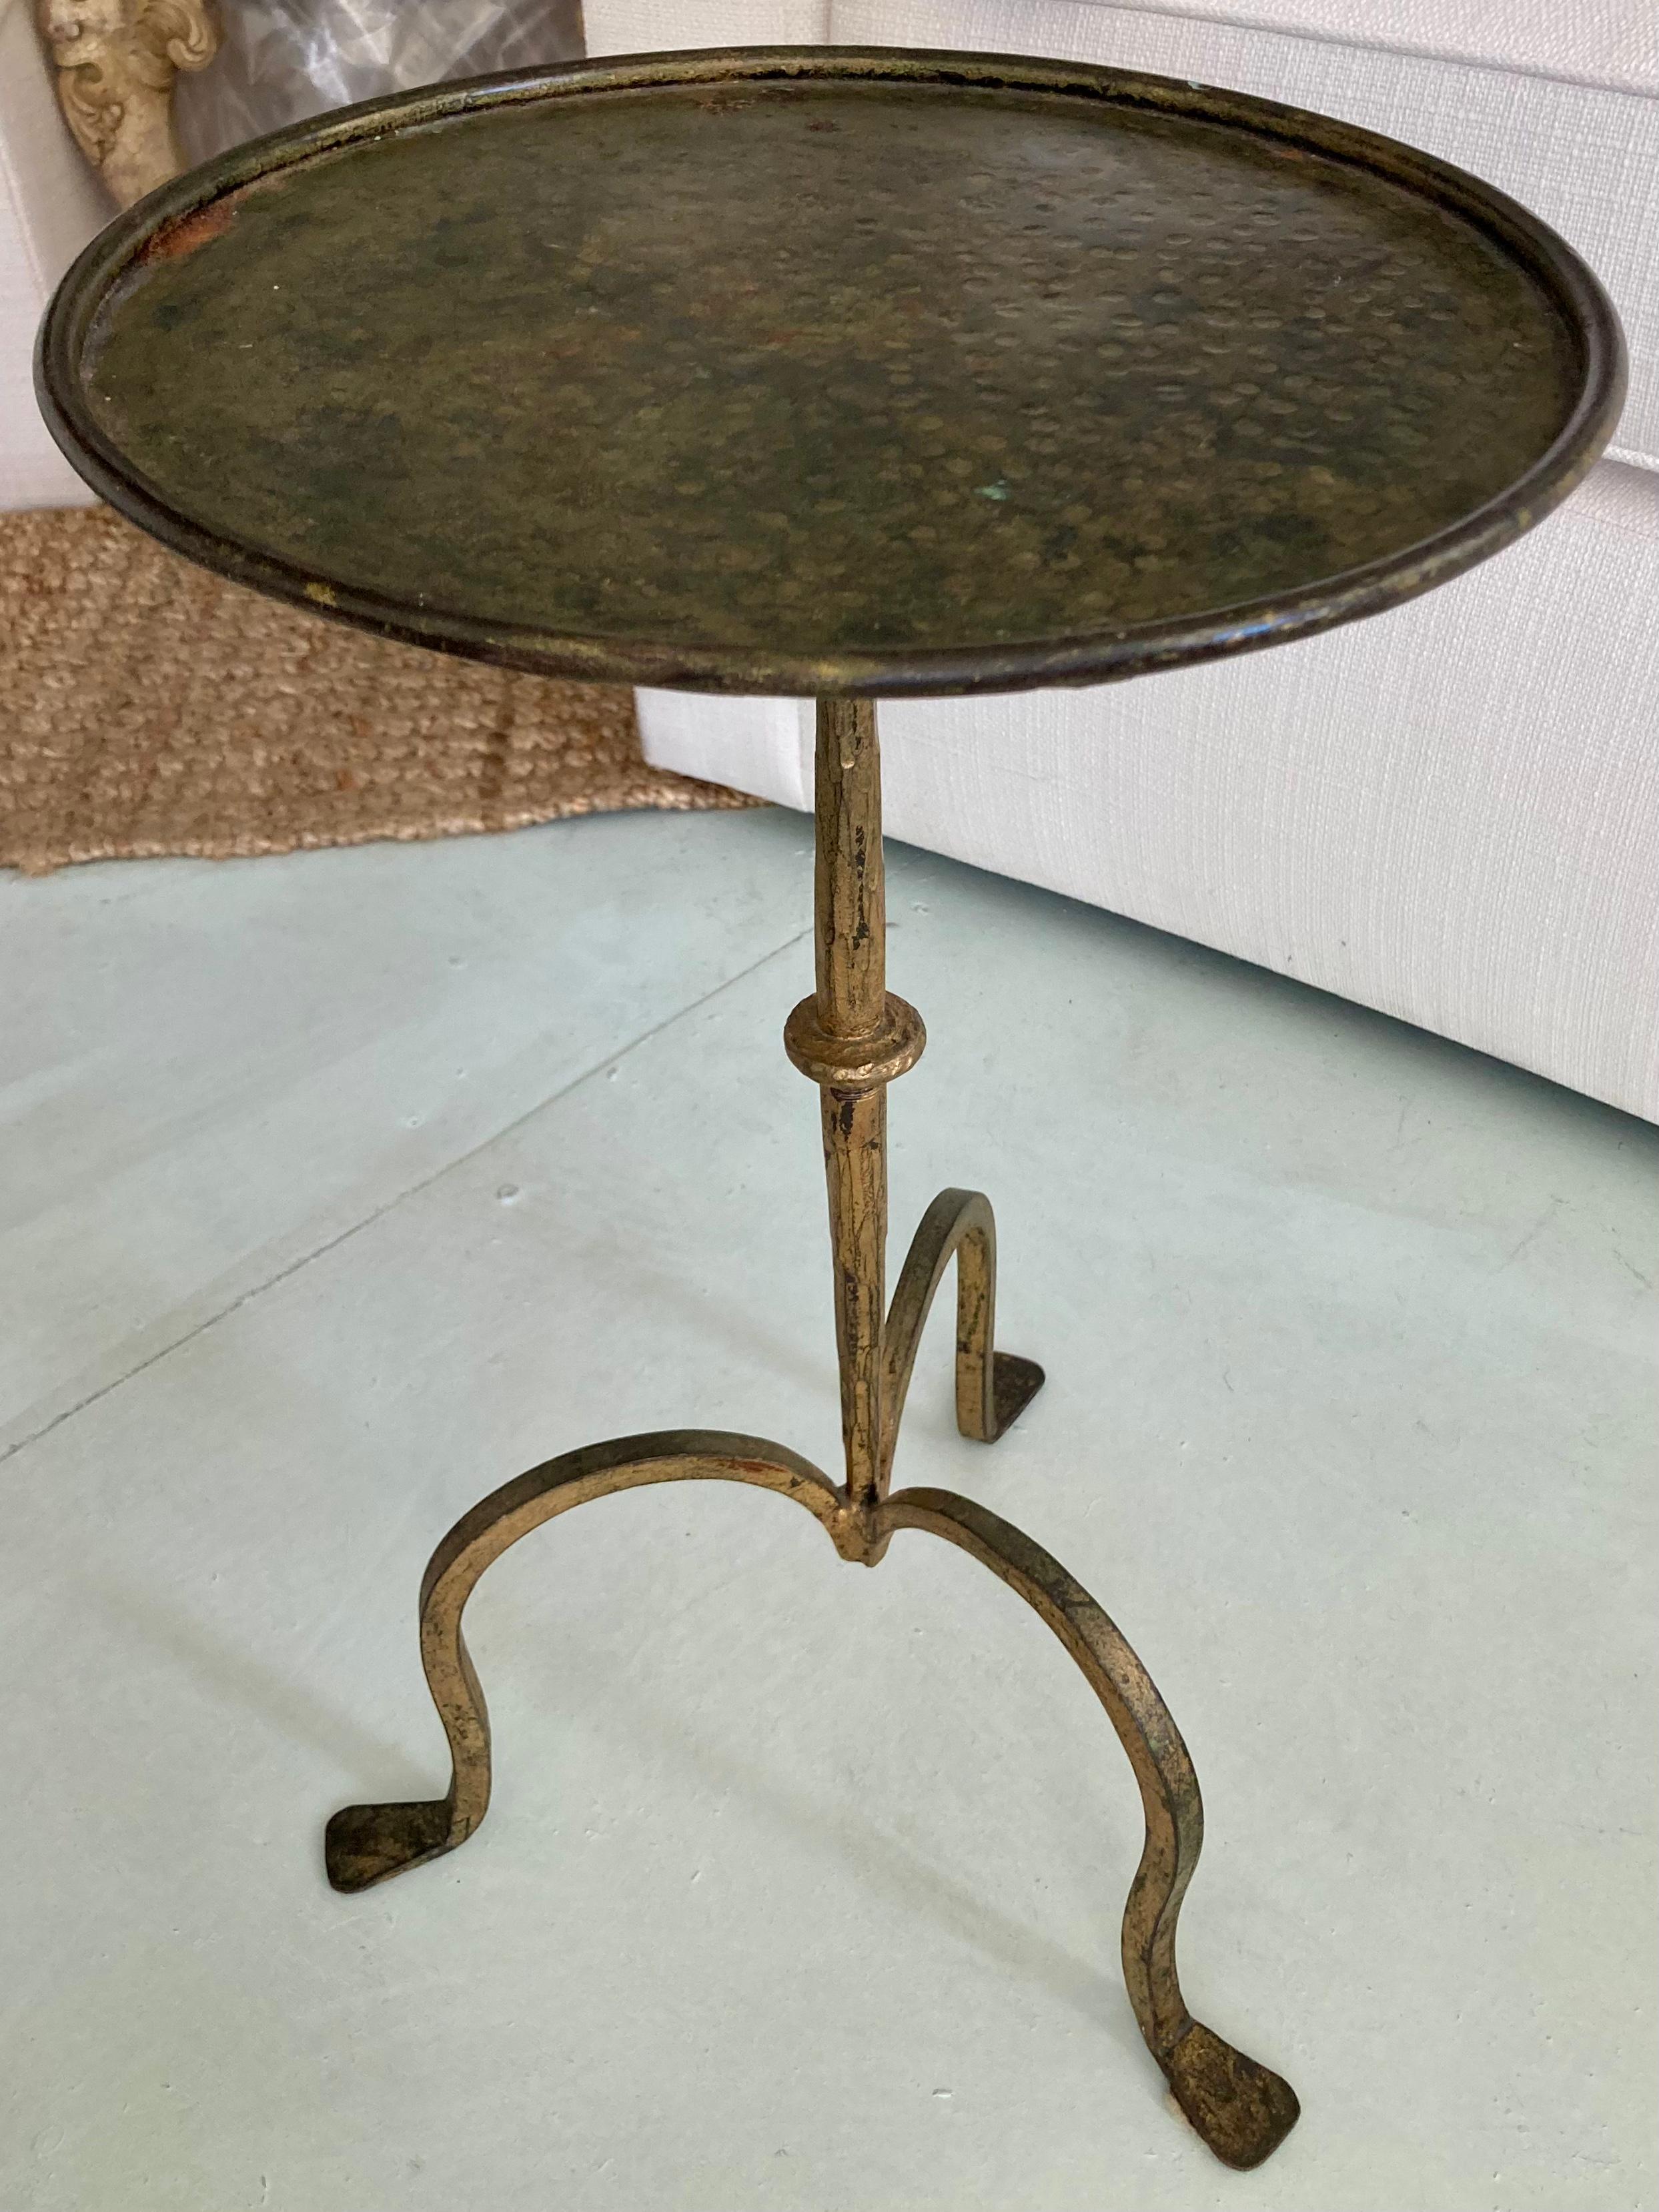 Beautiful French gilt bronze style Gueridon table. We have a similar one in our inventory so collect both!